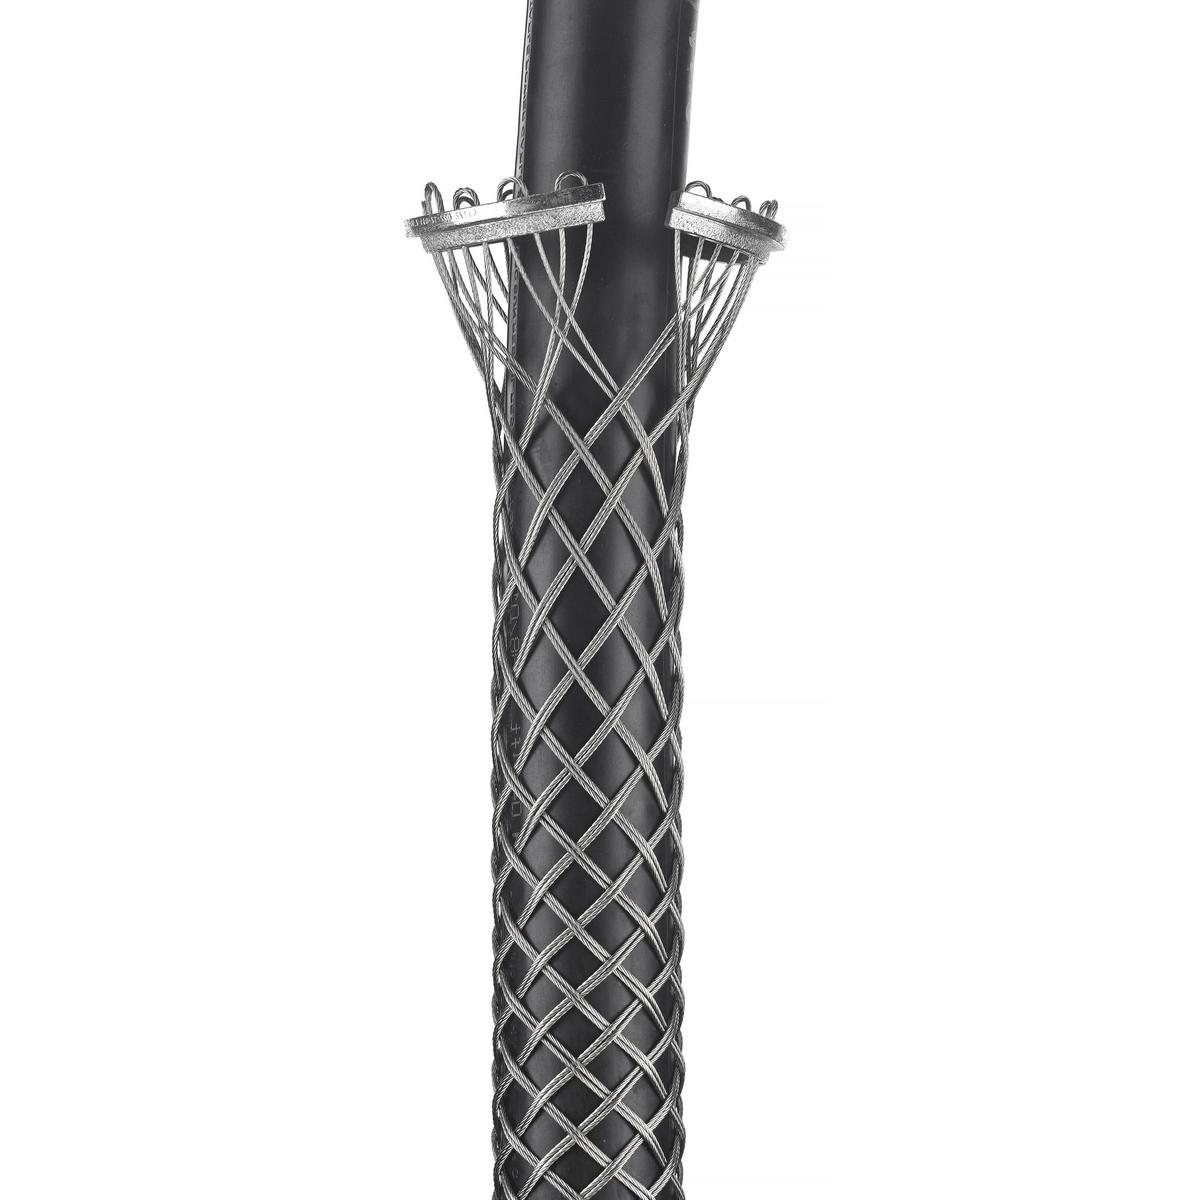 Hubbell 02212026 Conduit Riser Grips, 2.00-2.49", 3", Ring Type, Double Weave, Split Mesh, Lace Closing  ; Suitable for standard rigid metal conduit and schedule 40 rigid PVC conduit only ; Pemanently fastened to support ring ; For permanent support when cable end is avai